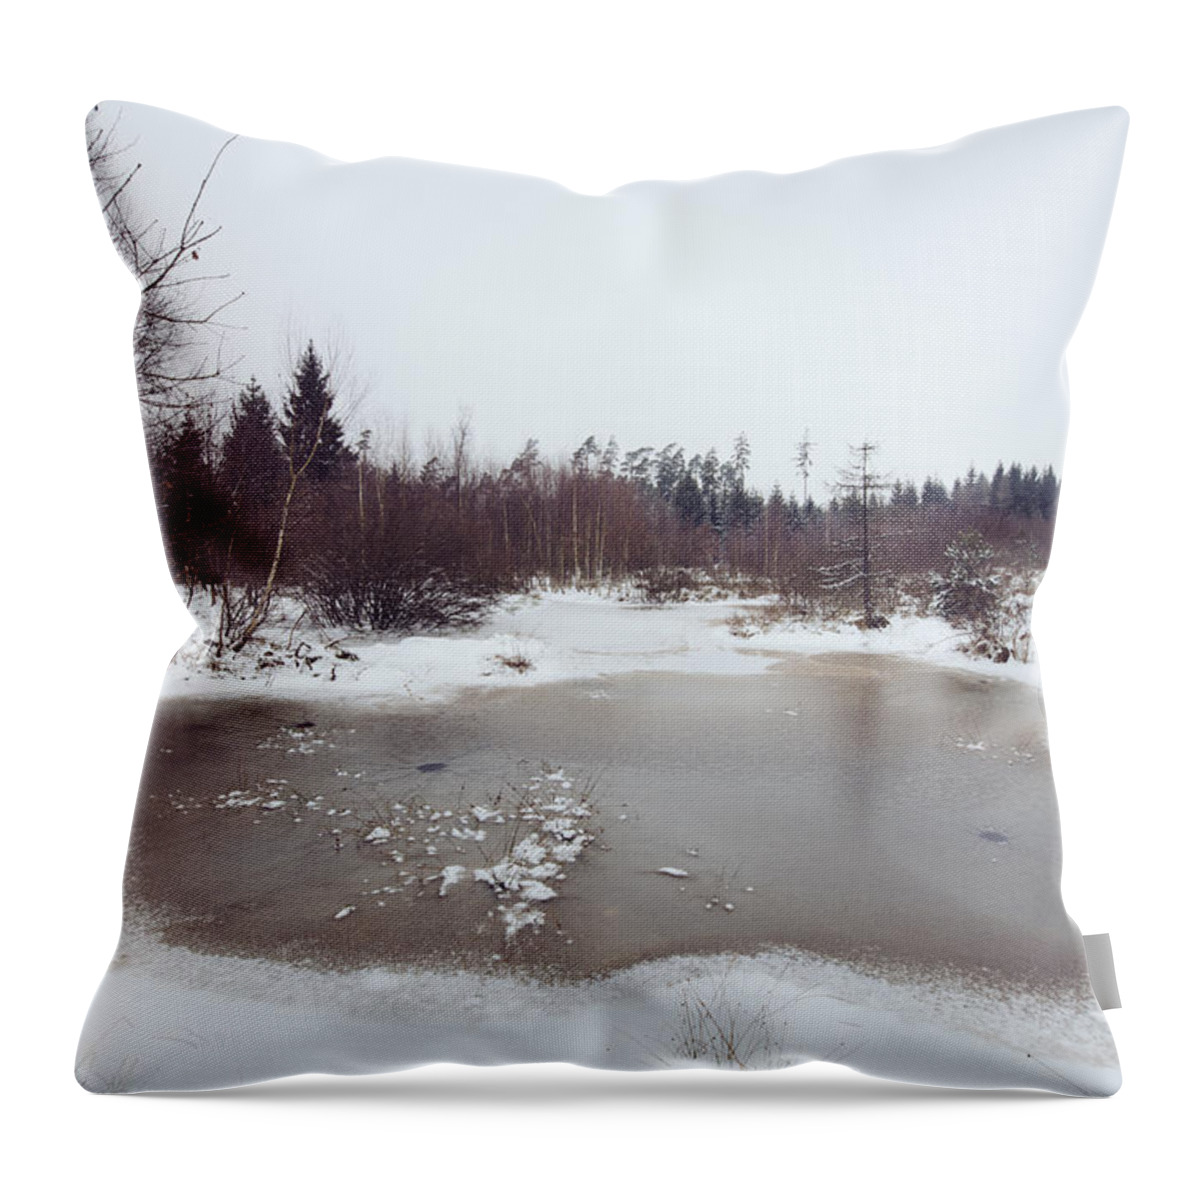 Winter Throw Pillow featuring the photograph Winter landscape with trees and frozen pond by Matthias Hauser